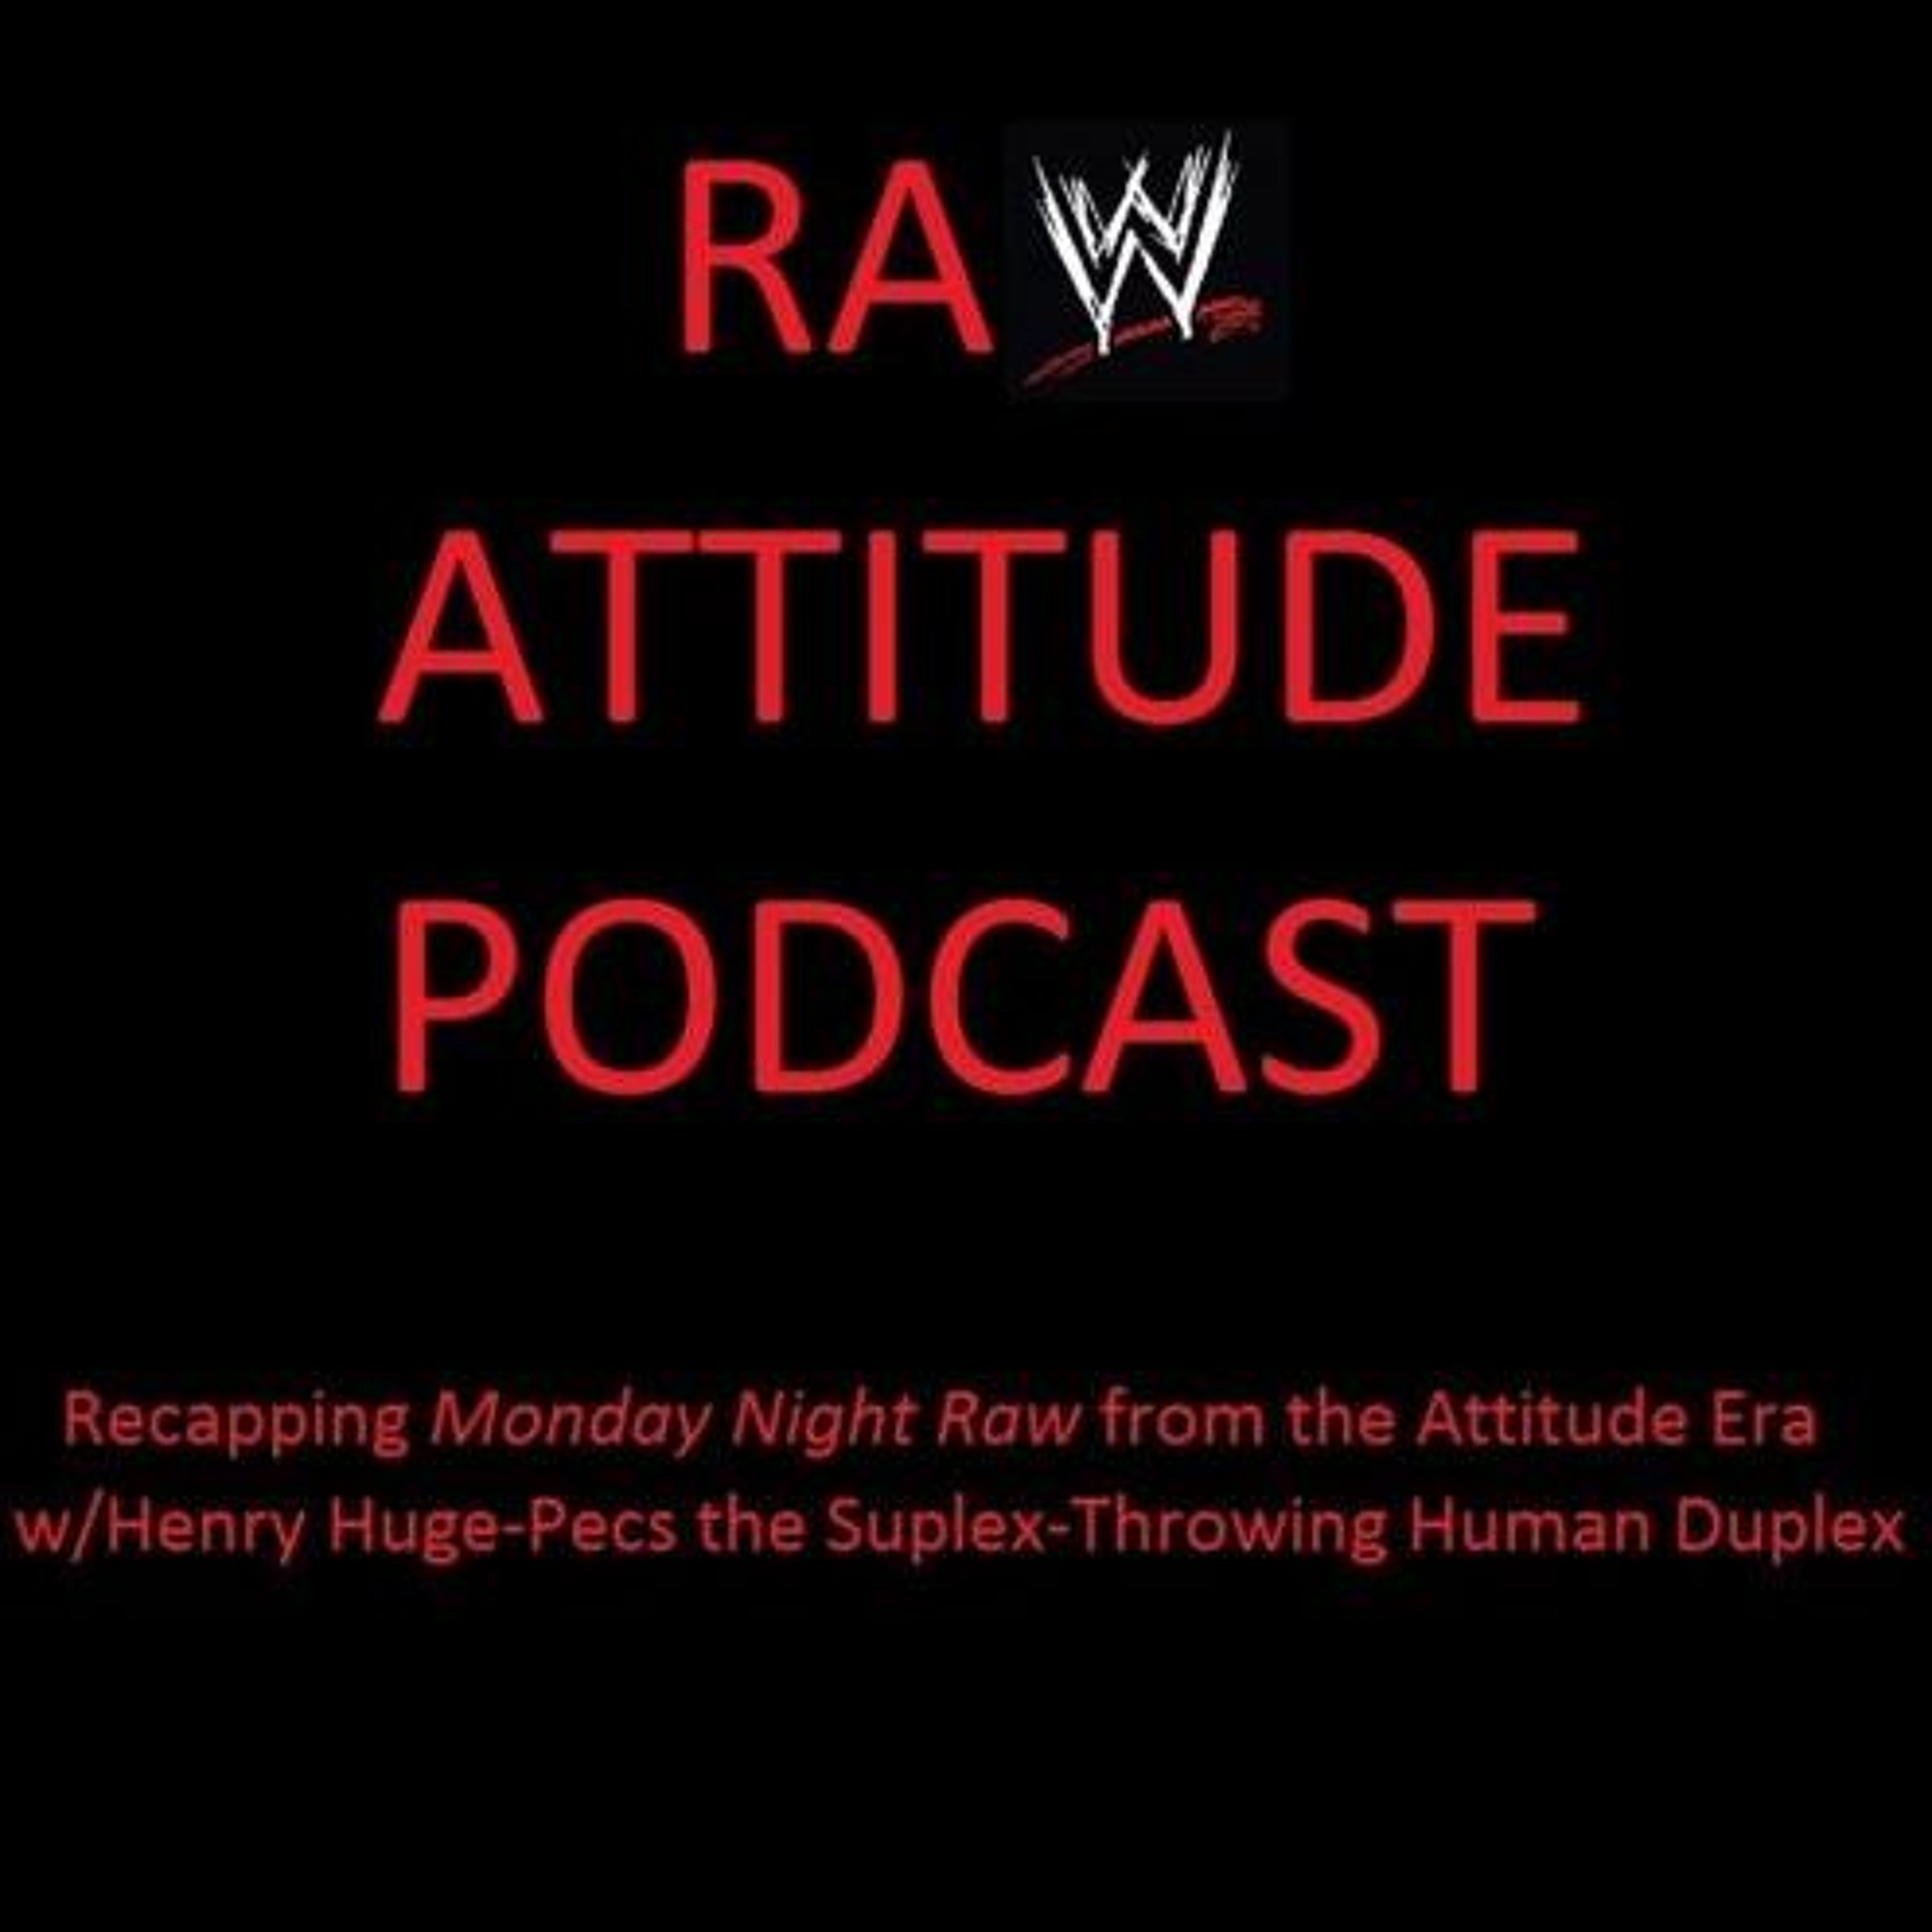 Episode 13: Vince McMahon Turns Heel & The Rock Debuts Almost All of His Catchphrases!